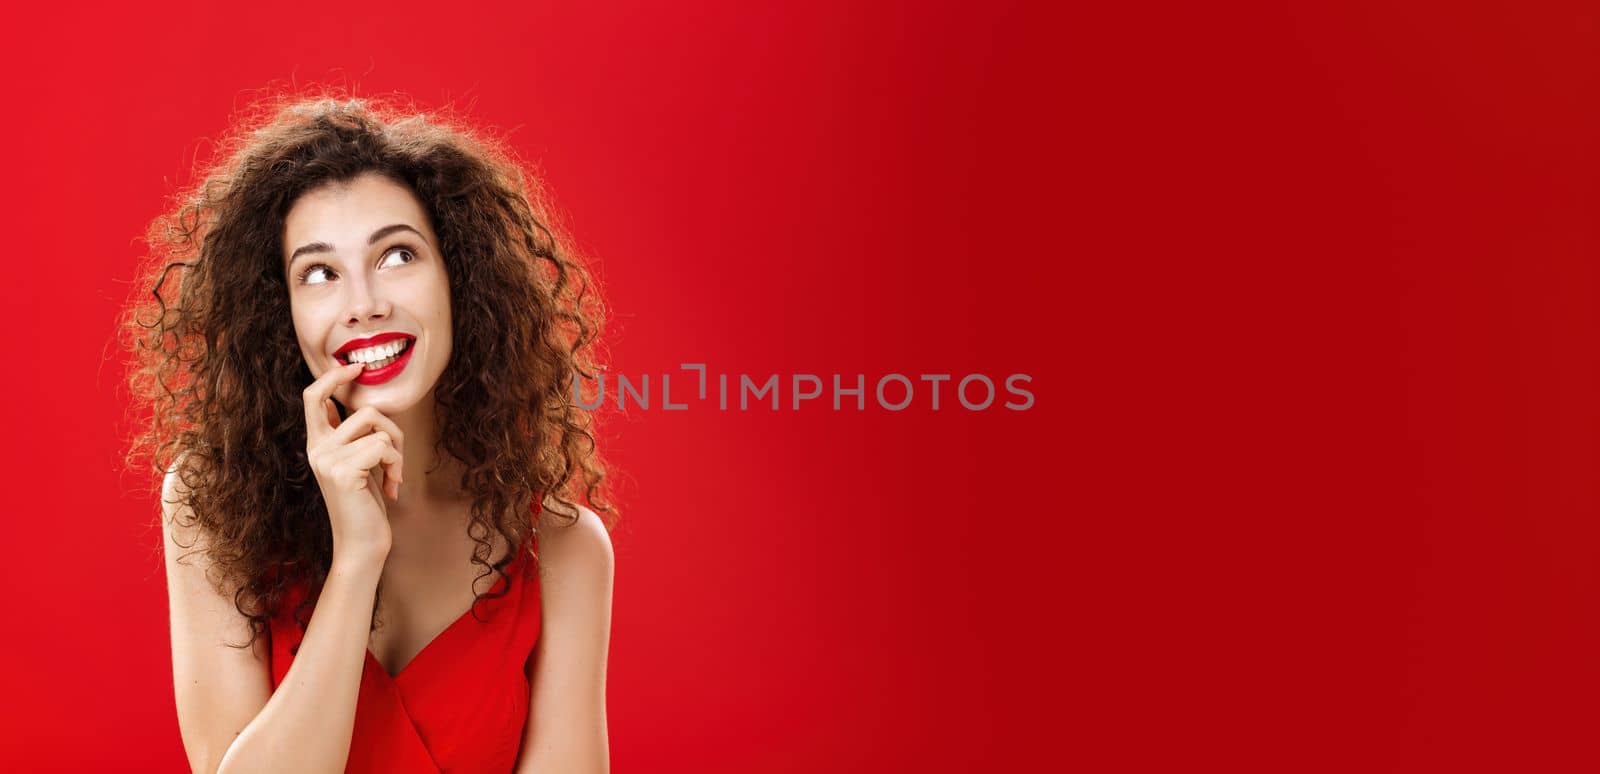 Cute charismatic and tender dreamy woman with curly hairstyle in red dress biting finger and smiling with desire in eyes looking at upper right corner daydreaming picturing object she wants by Benzoix